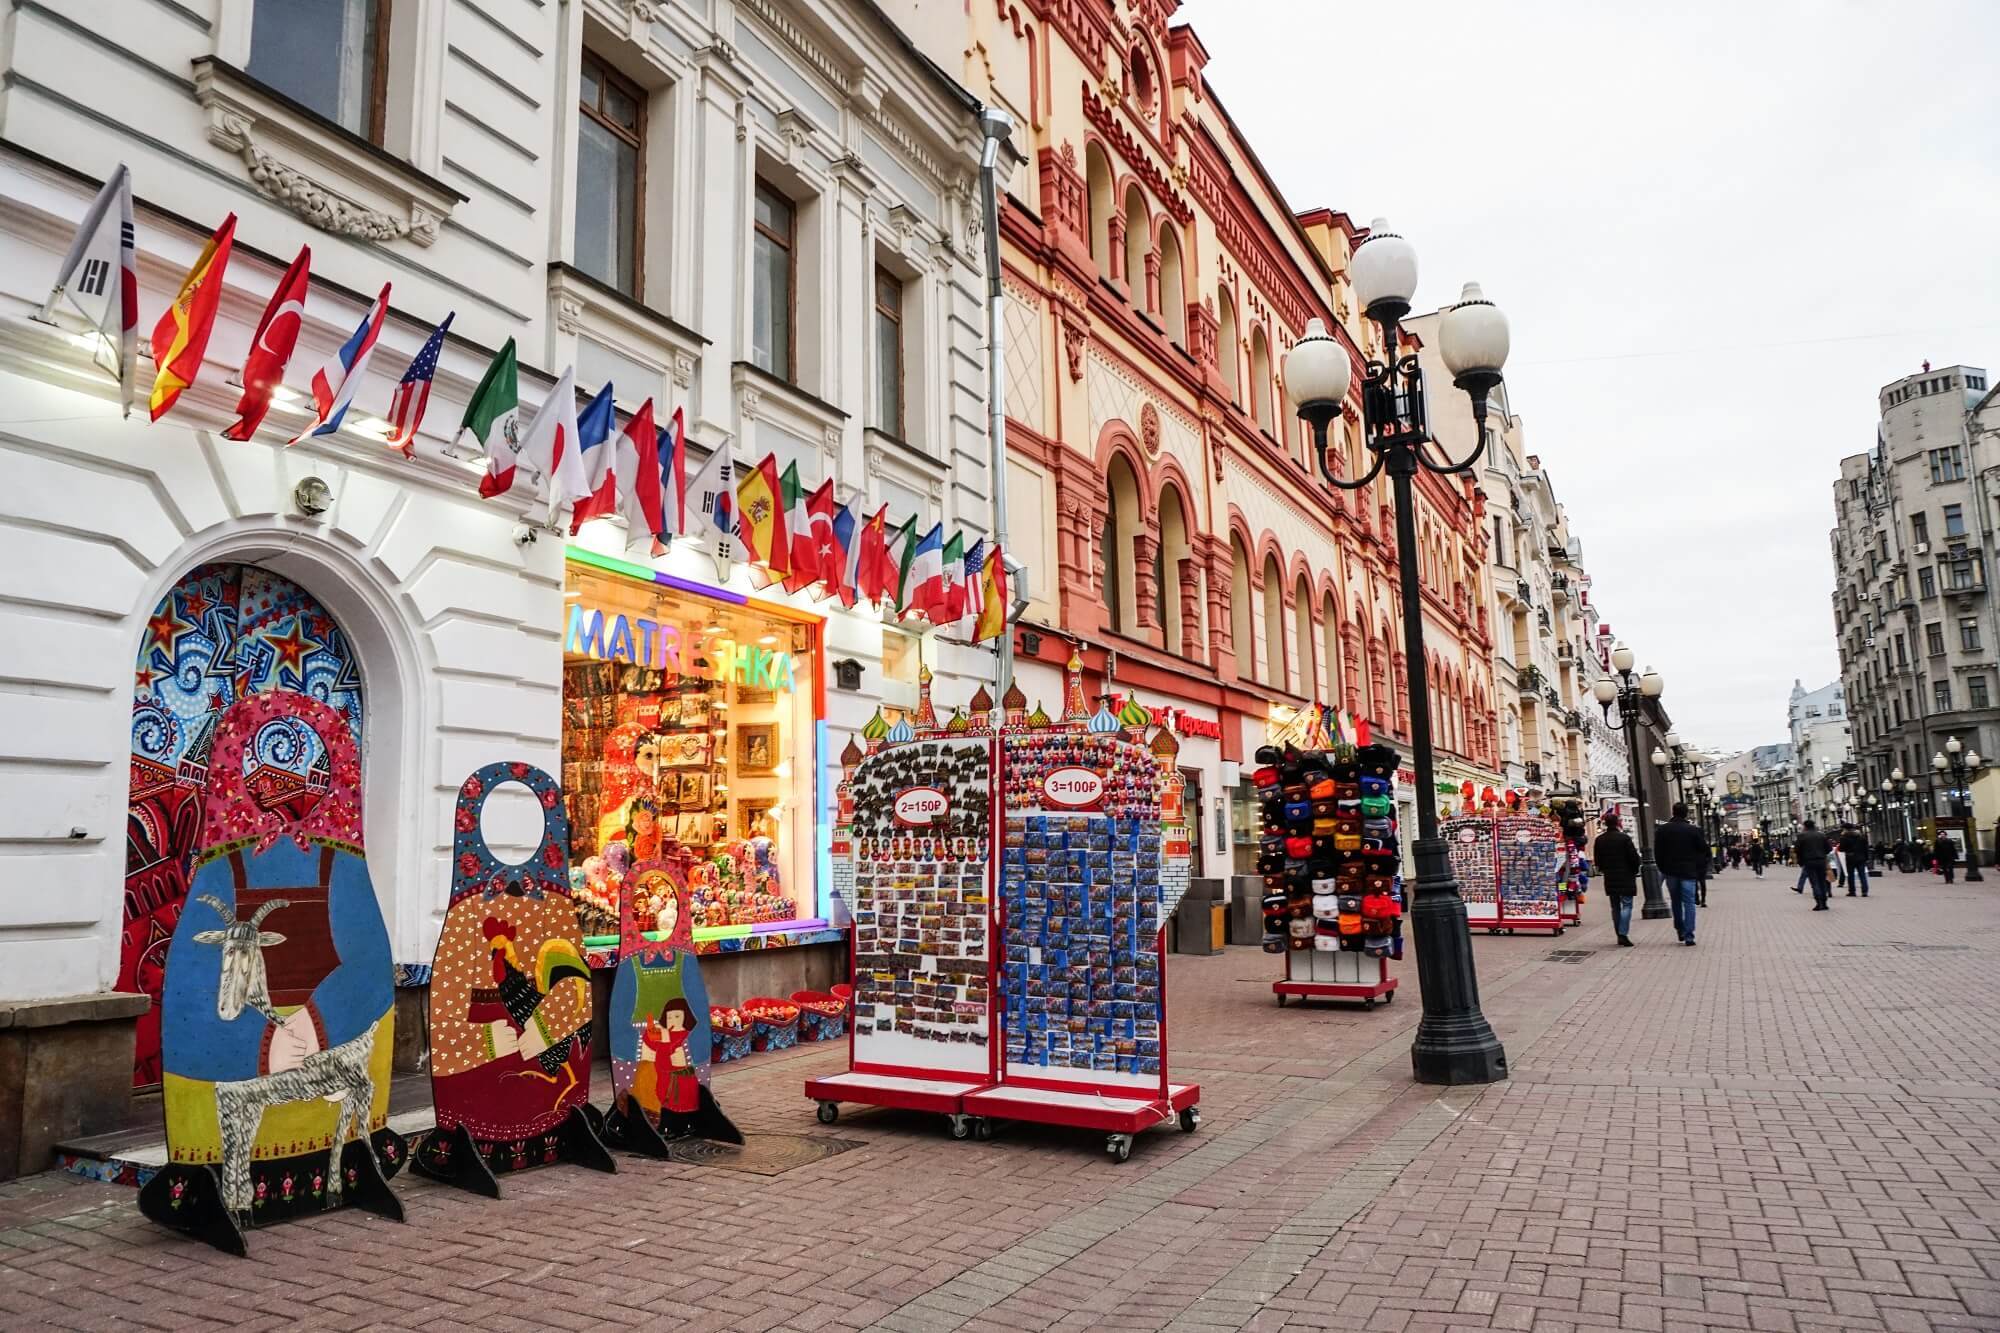 A sight of souvenir shops on Arbat Street in Moscow